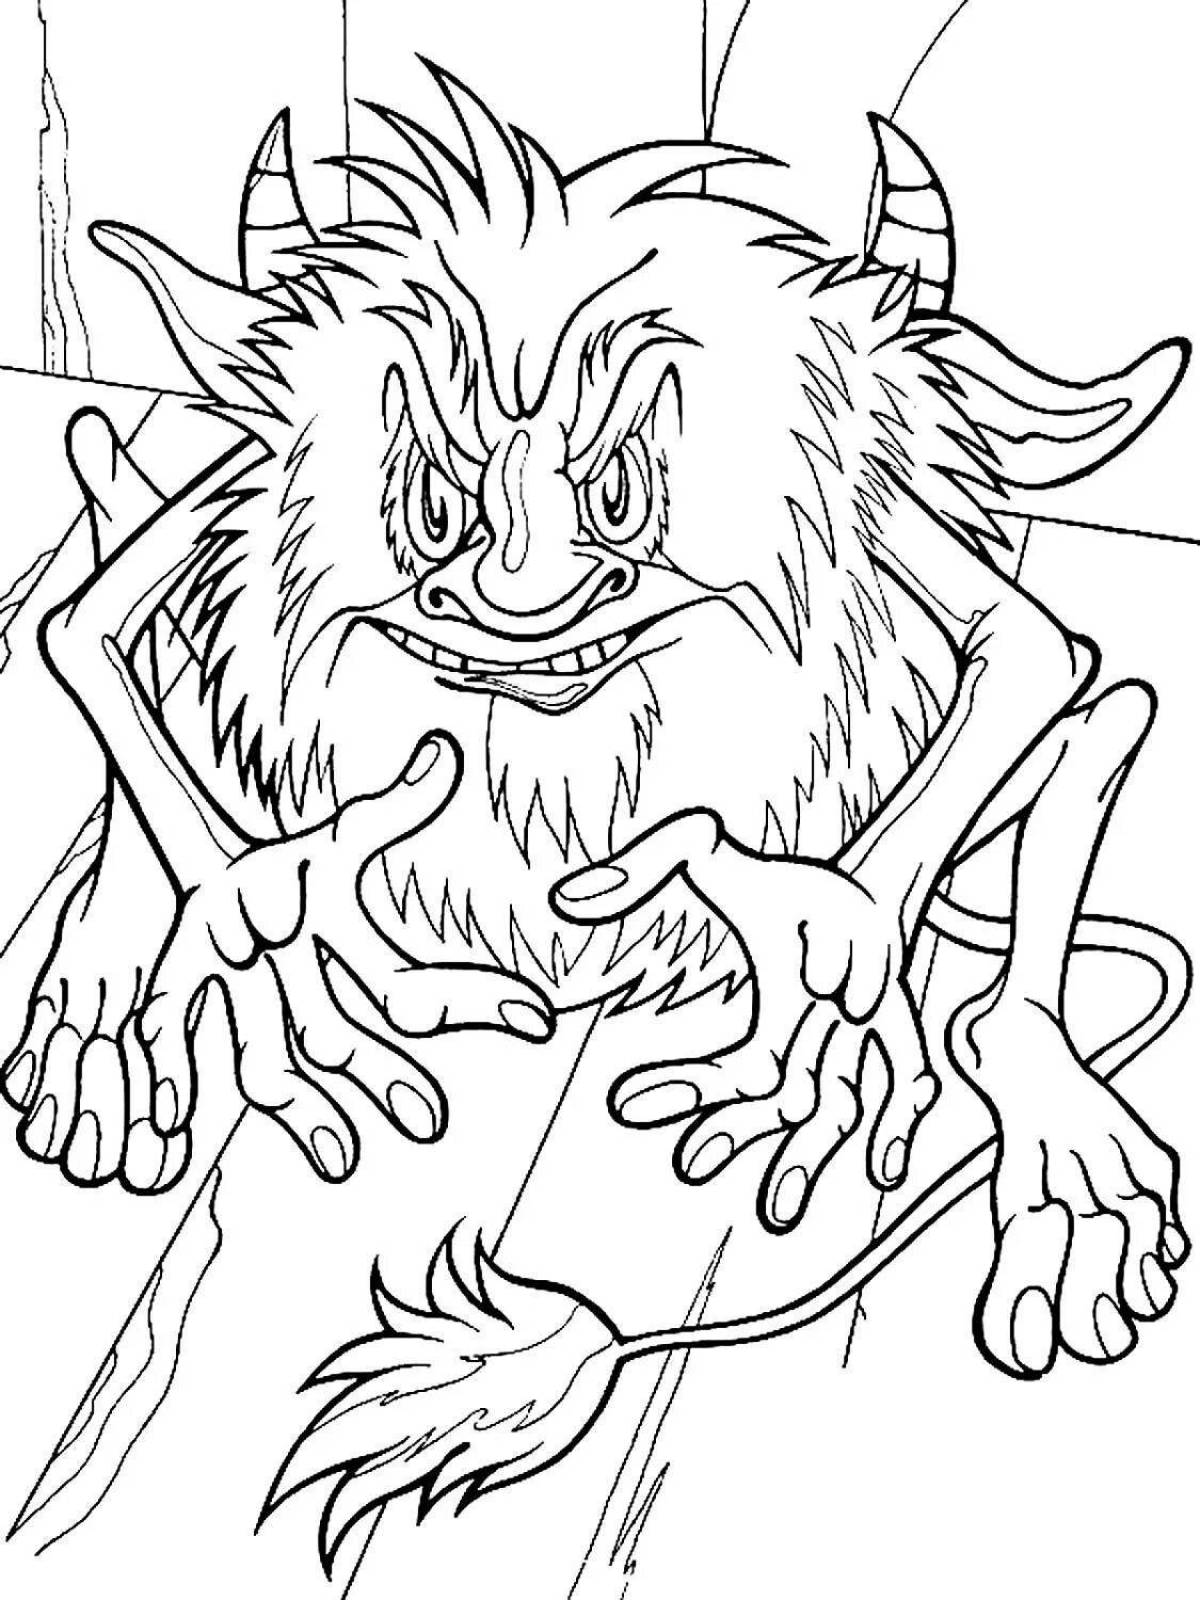 Coloring page of the film 